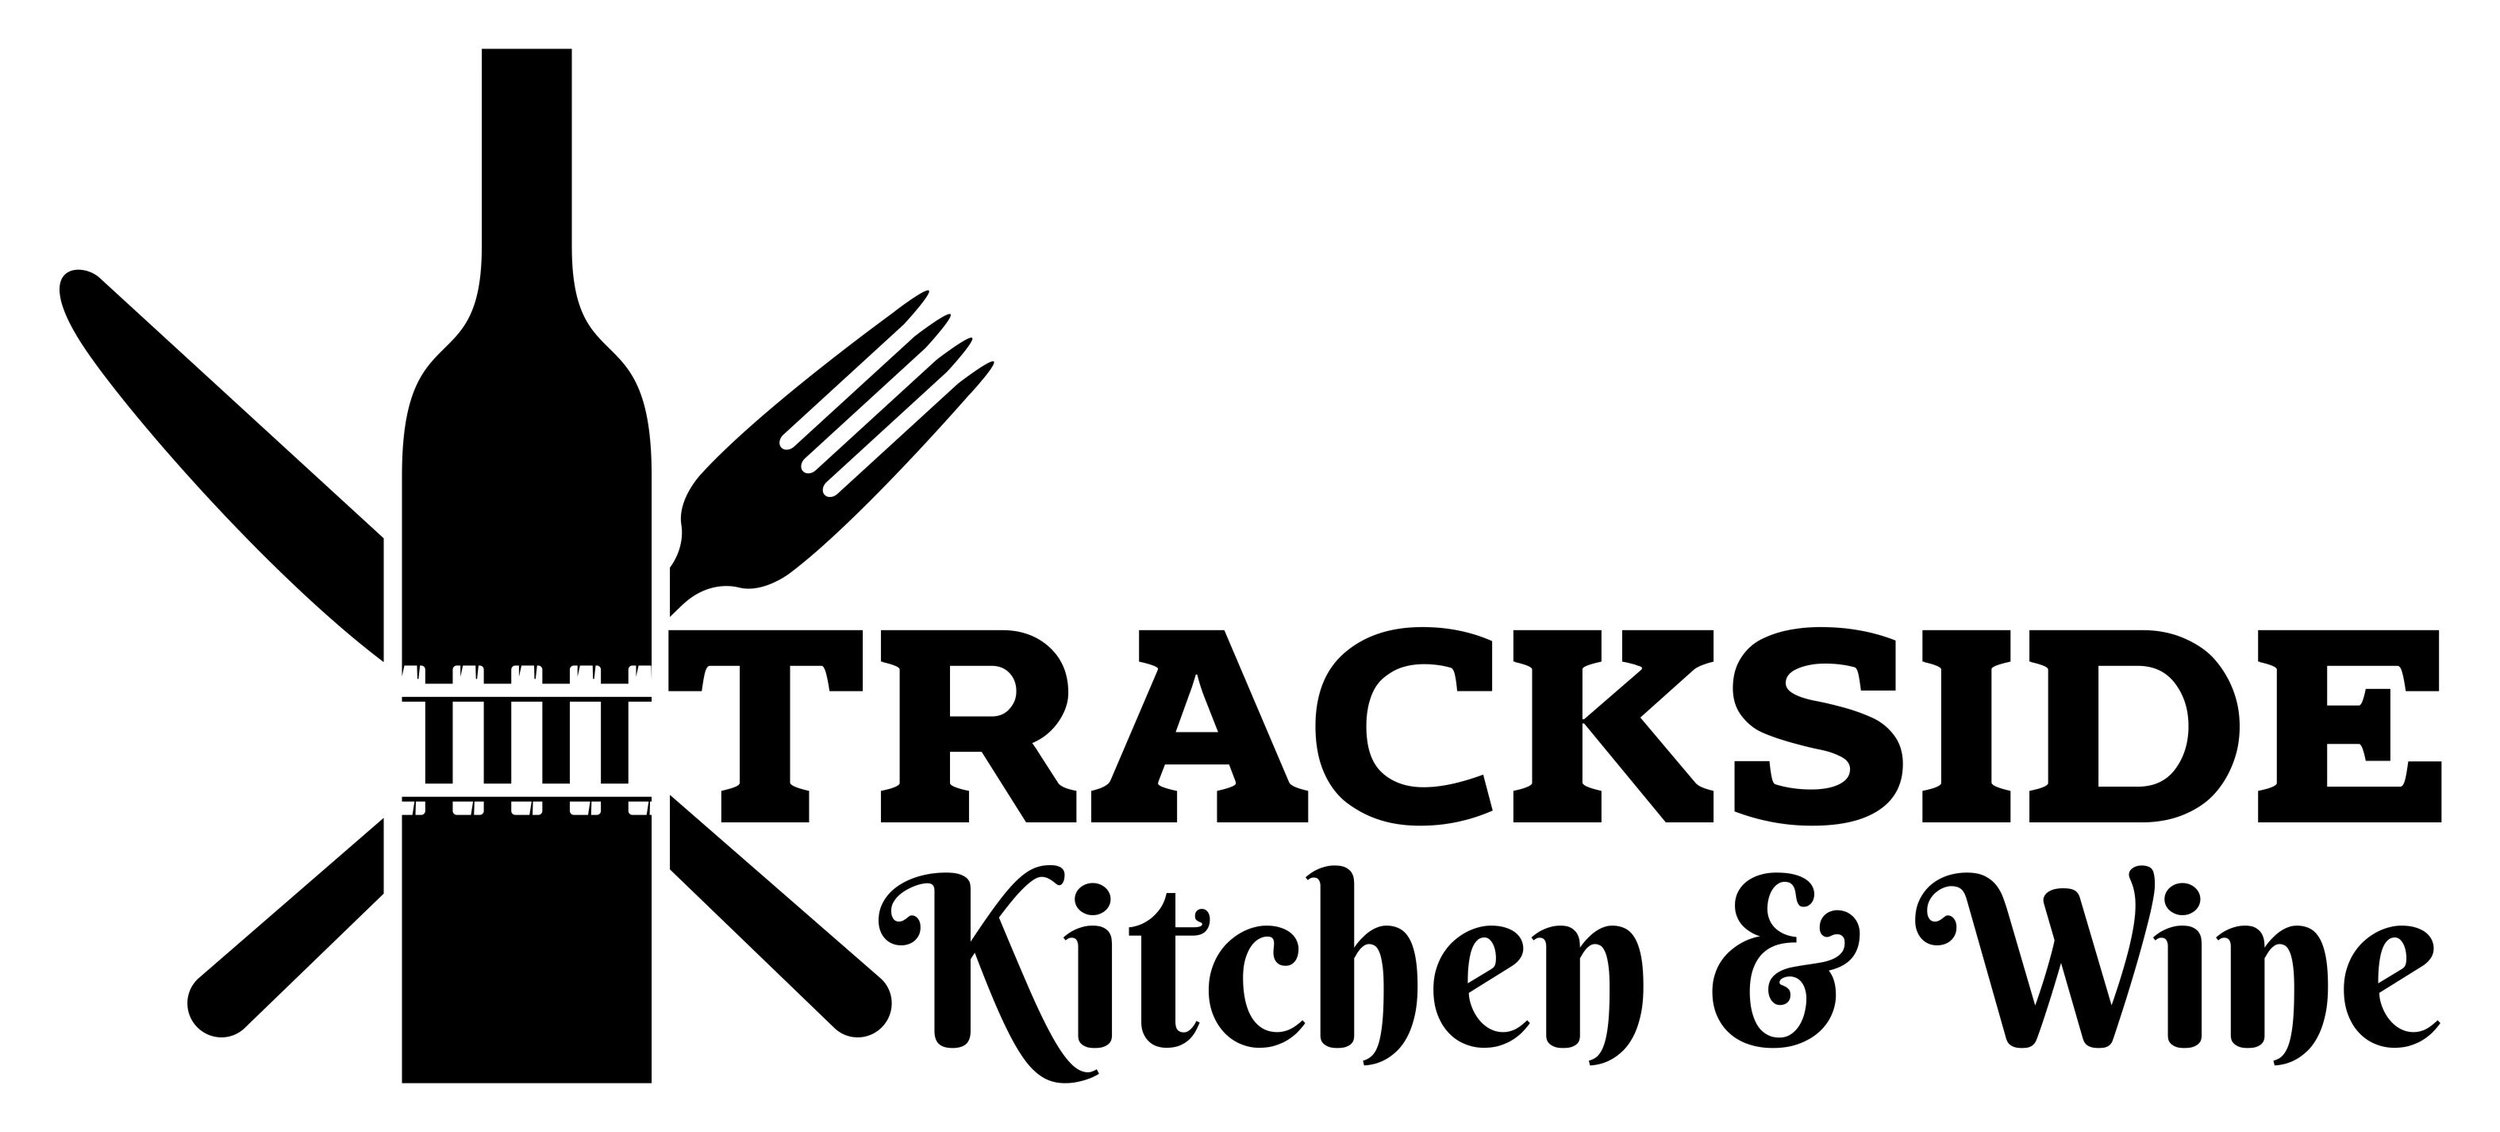  Trackside Kitchen &amp; Wine is a gold sponsor for the Downtown Ashland Association. 